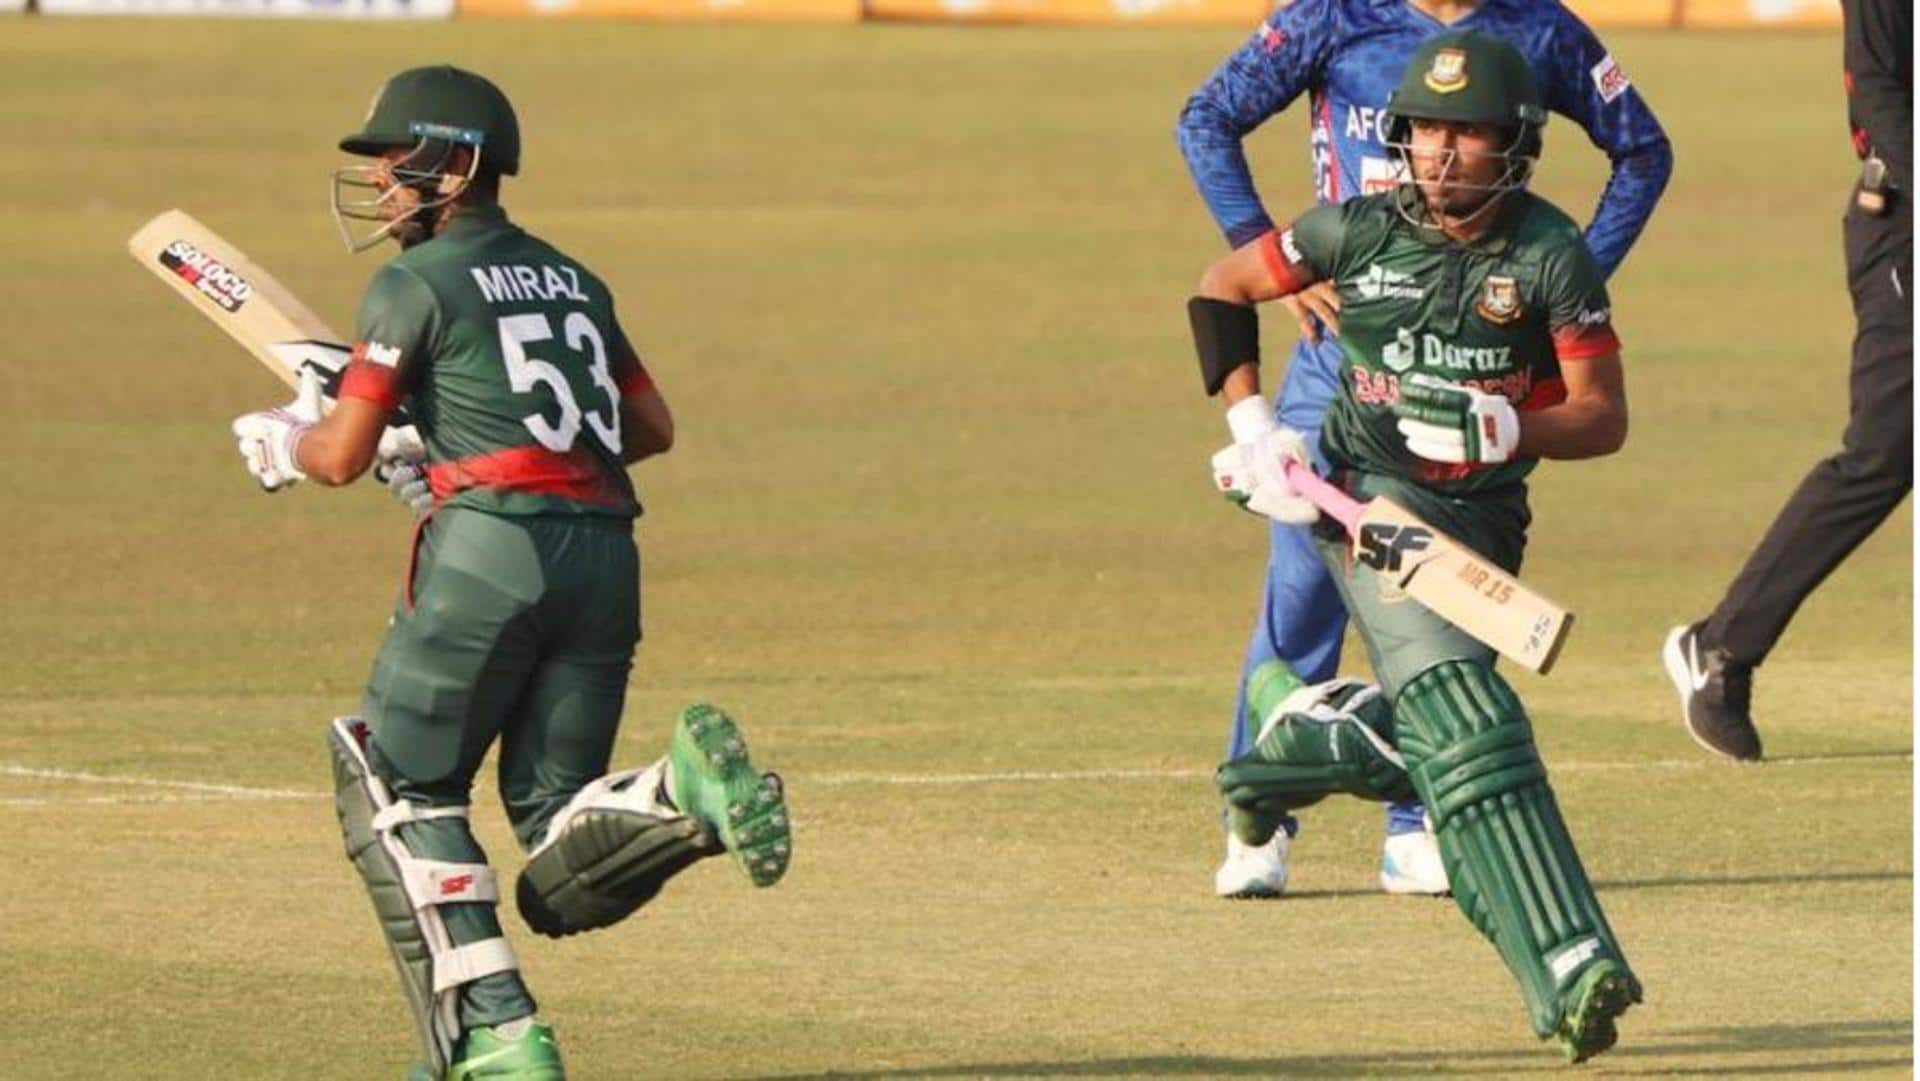 Bangladesh vs Afghanistan, 1st ODI: Here is the statistical preview